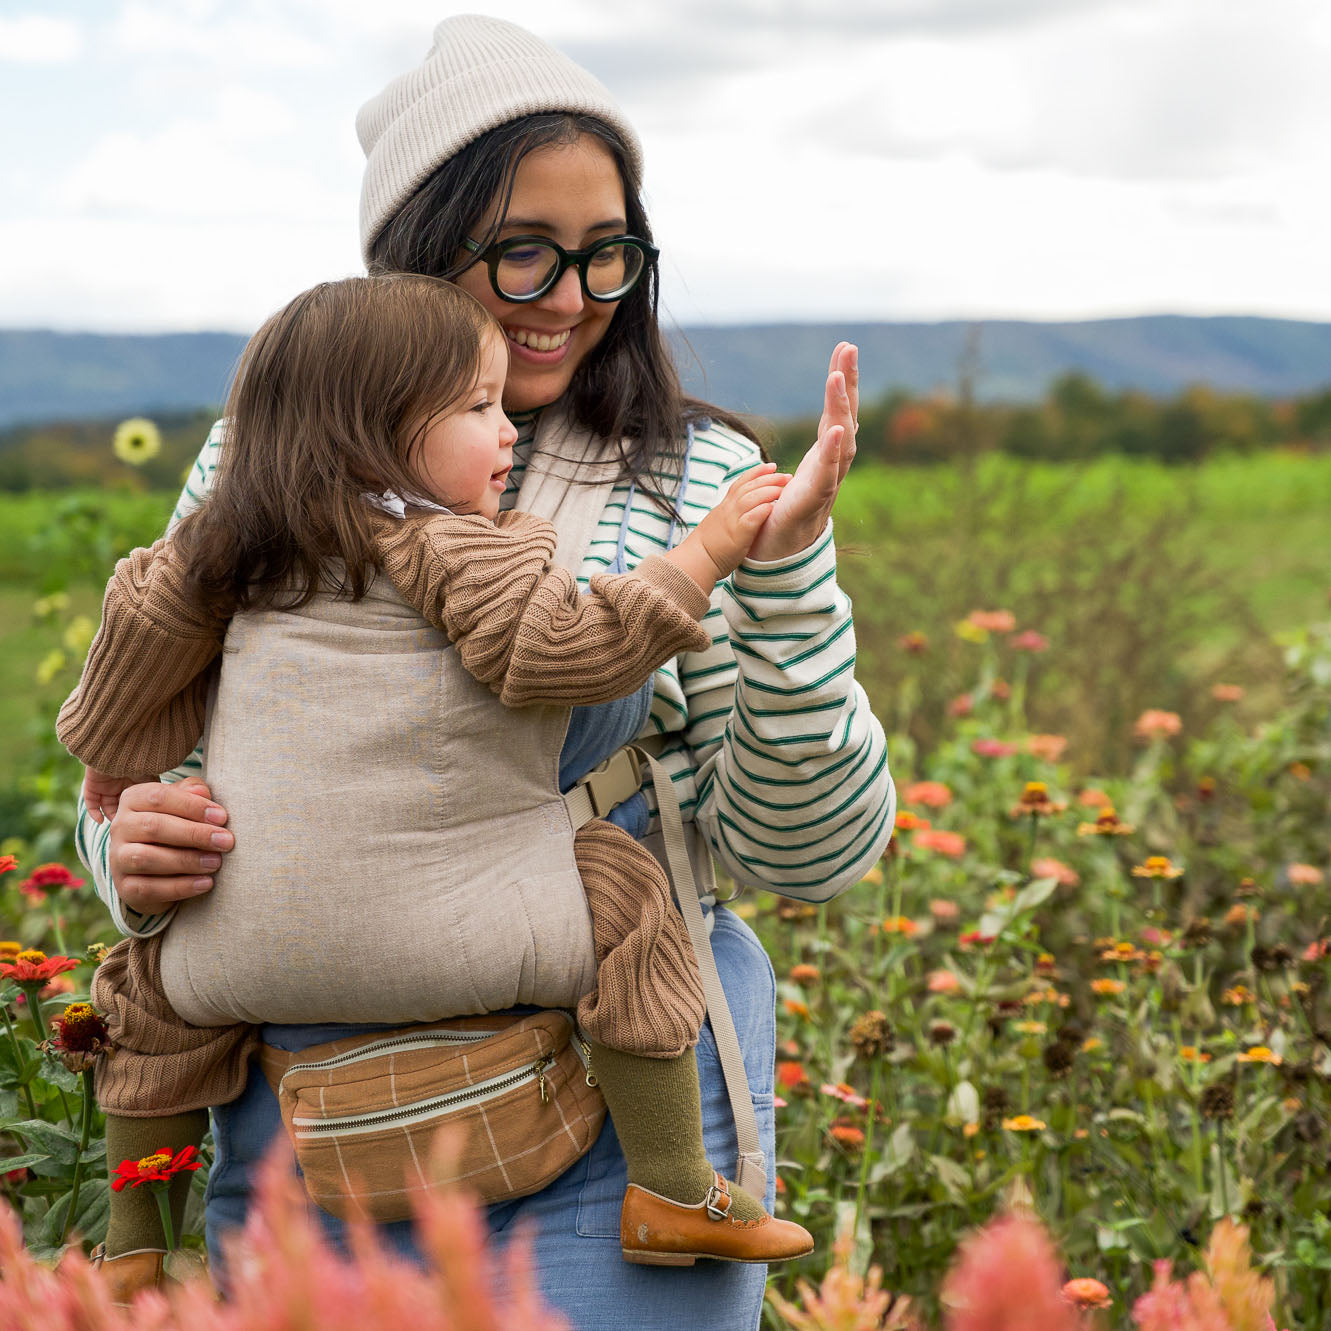 Woman babywearing her small toddler in a field of flowers